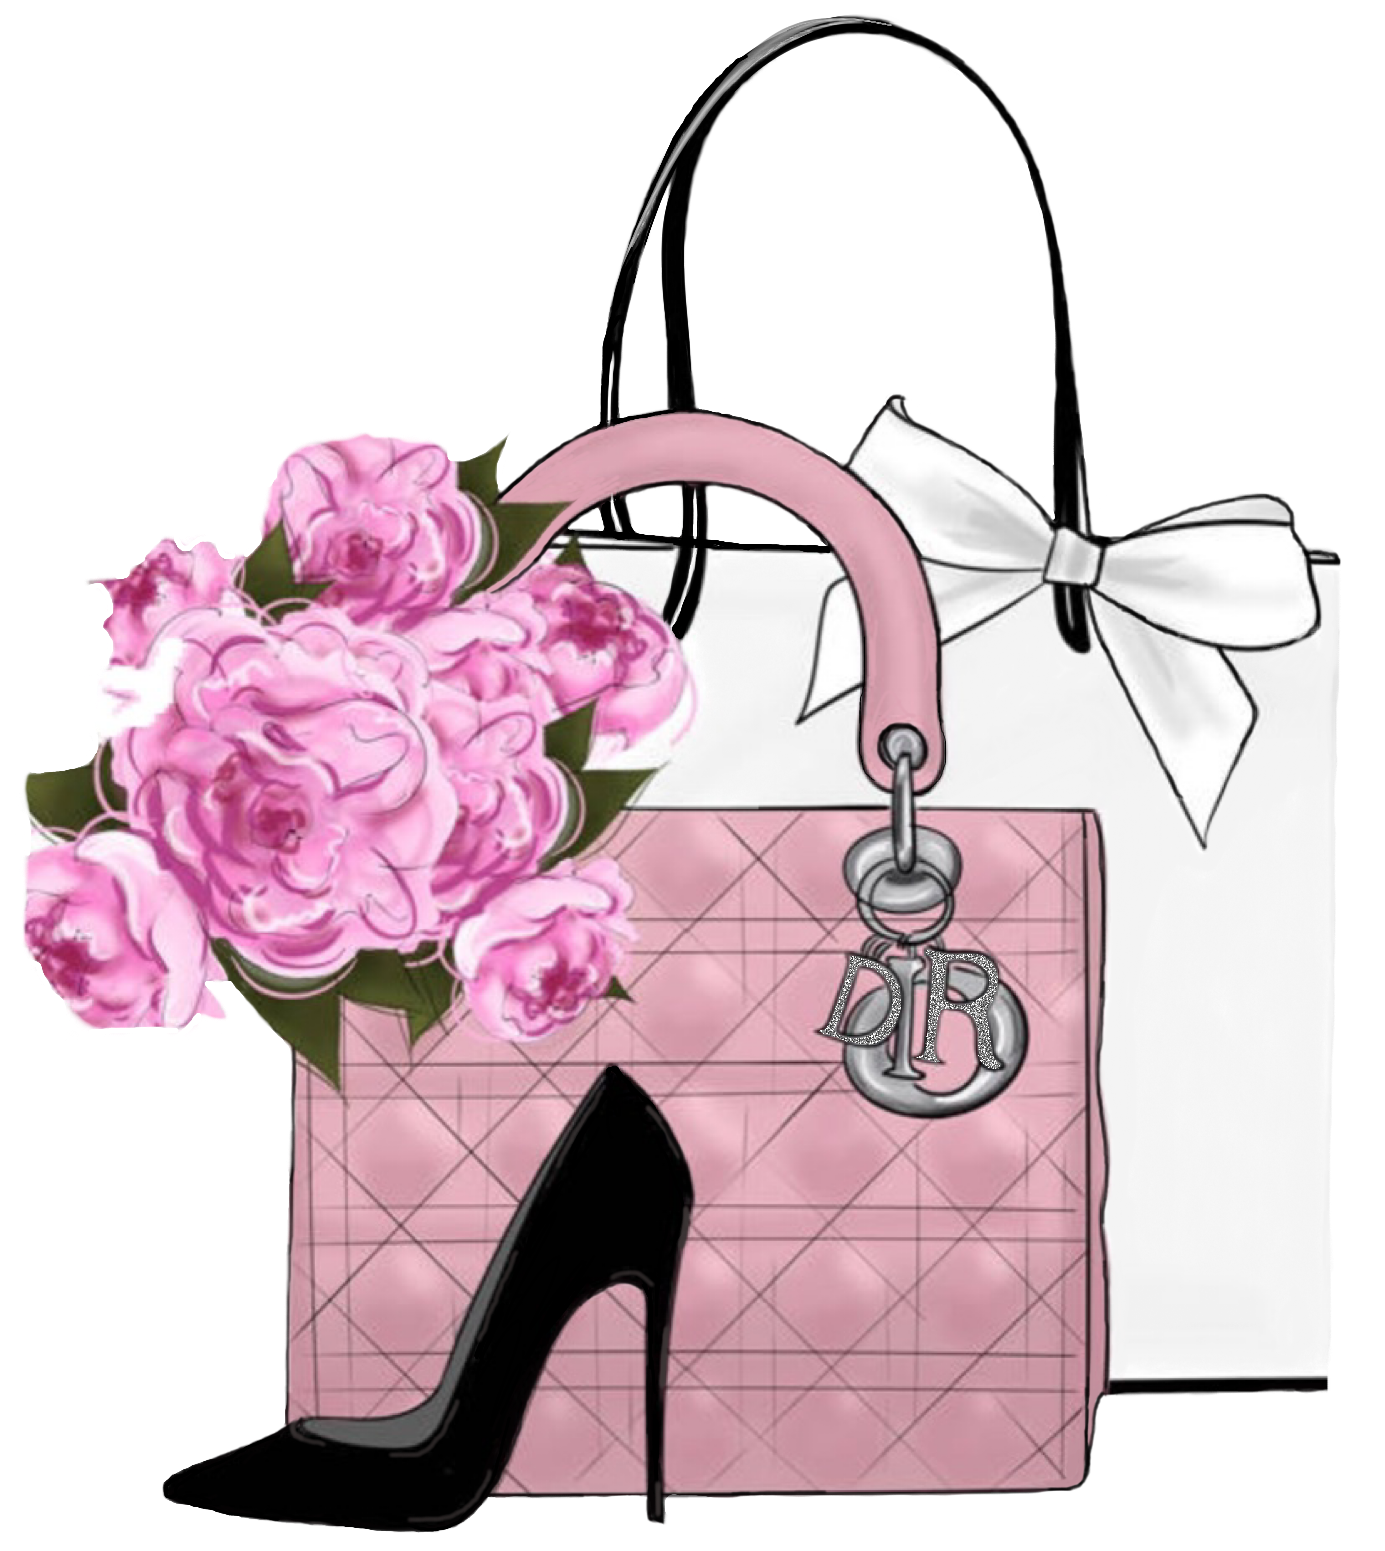 Dior Bag Rose Wall Art  Products bookmarks design inspiration and ideas